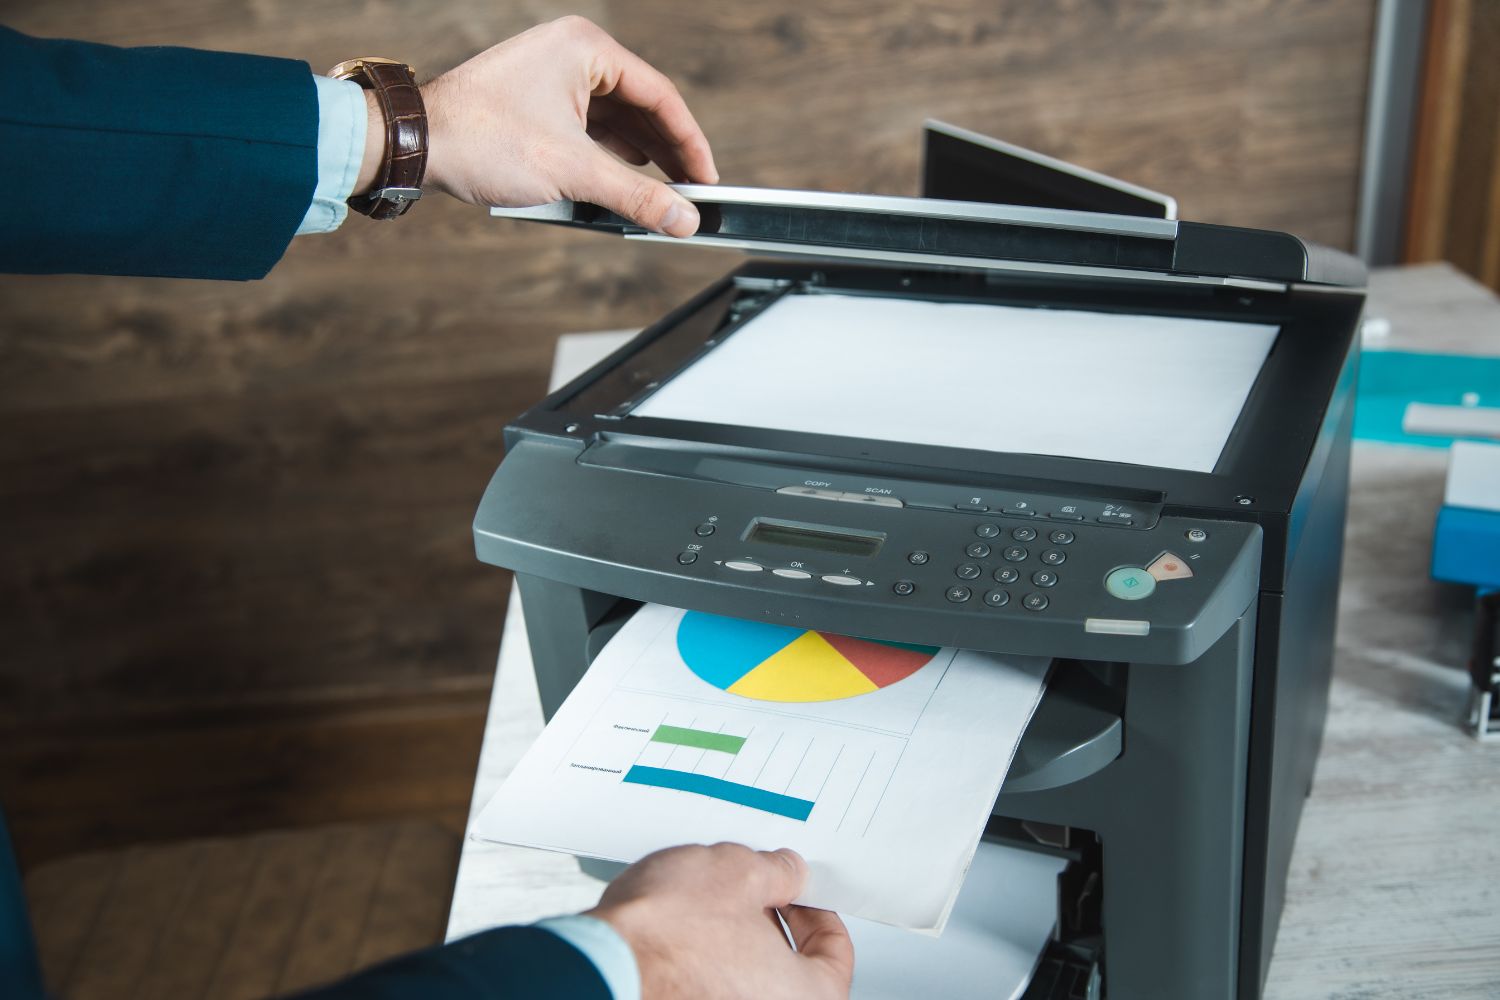 What to keep in mind while buying a good printer